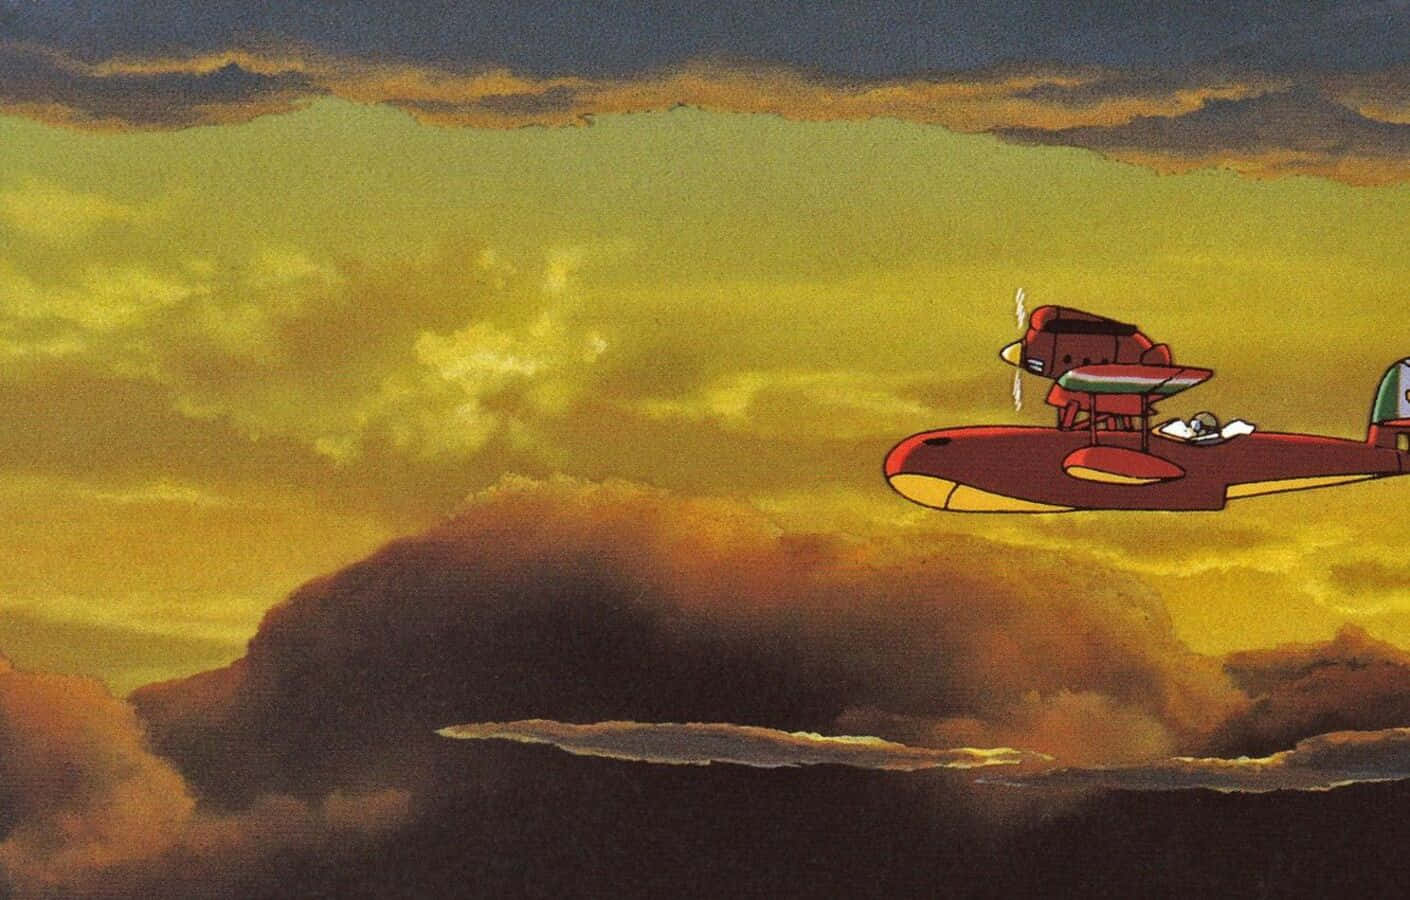 Porco Rosso soaring through the skies in his red seaplane Wallpaper